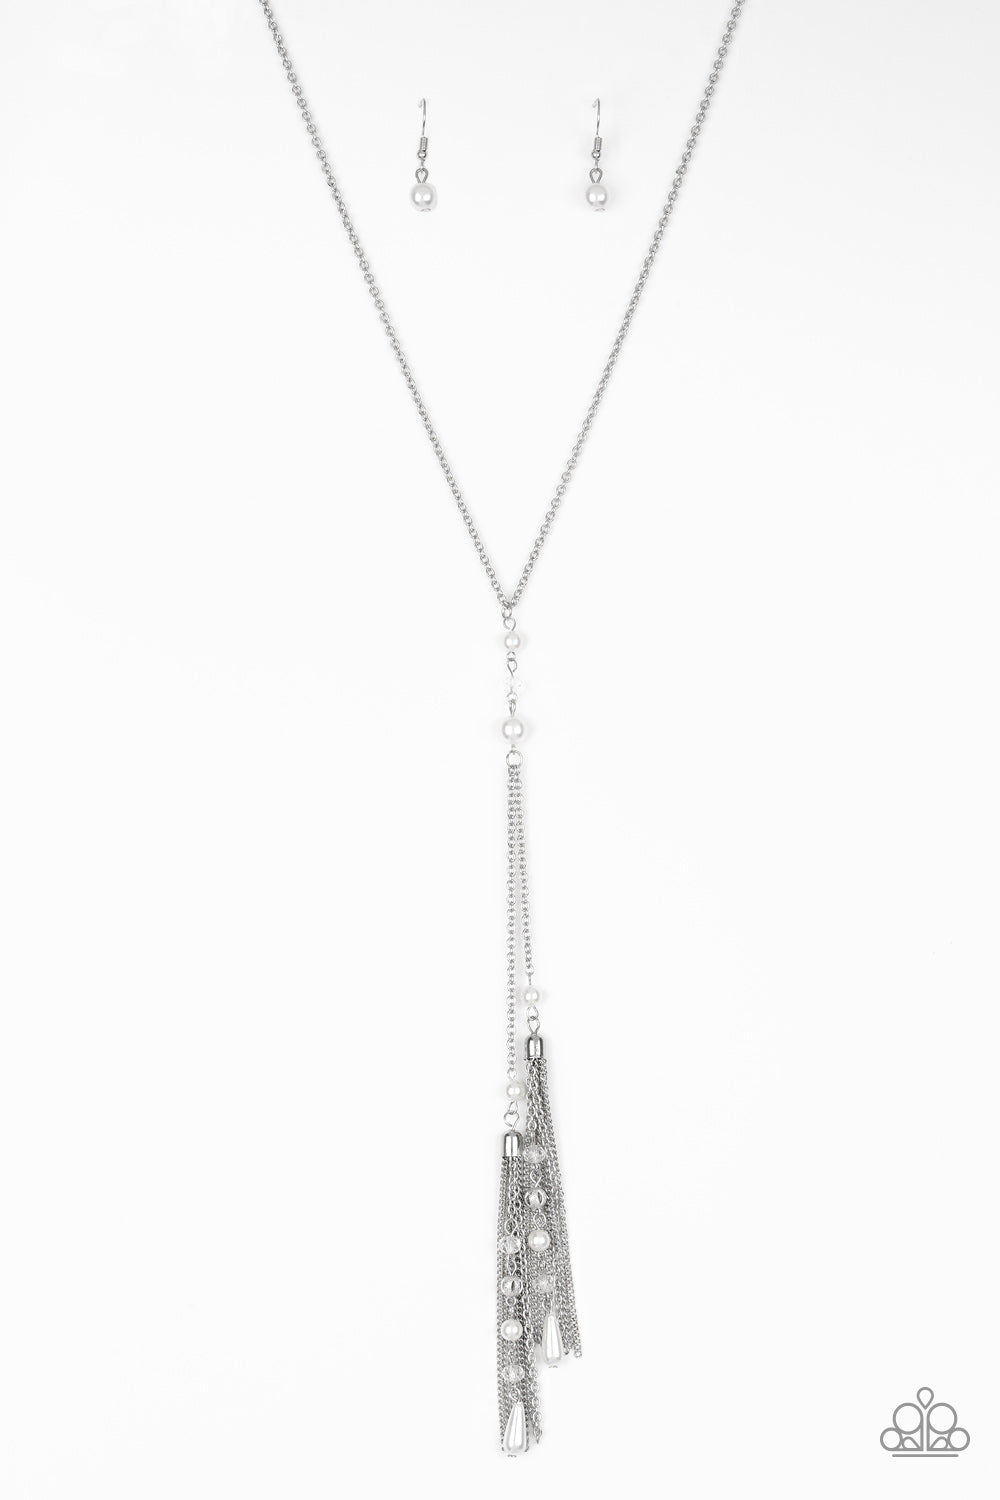 Timeless Tassels - Silver Necklace